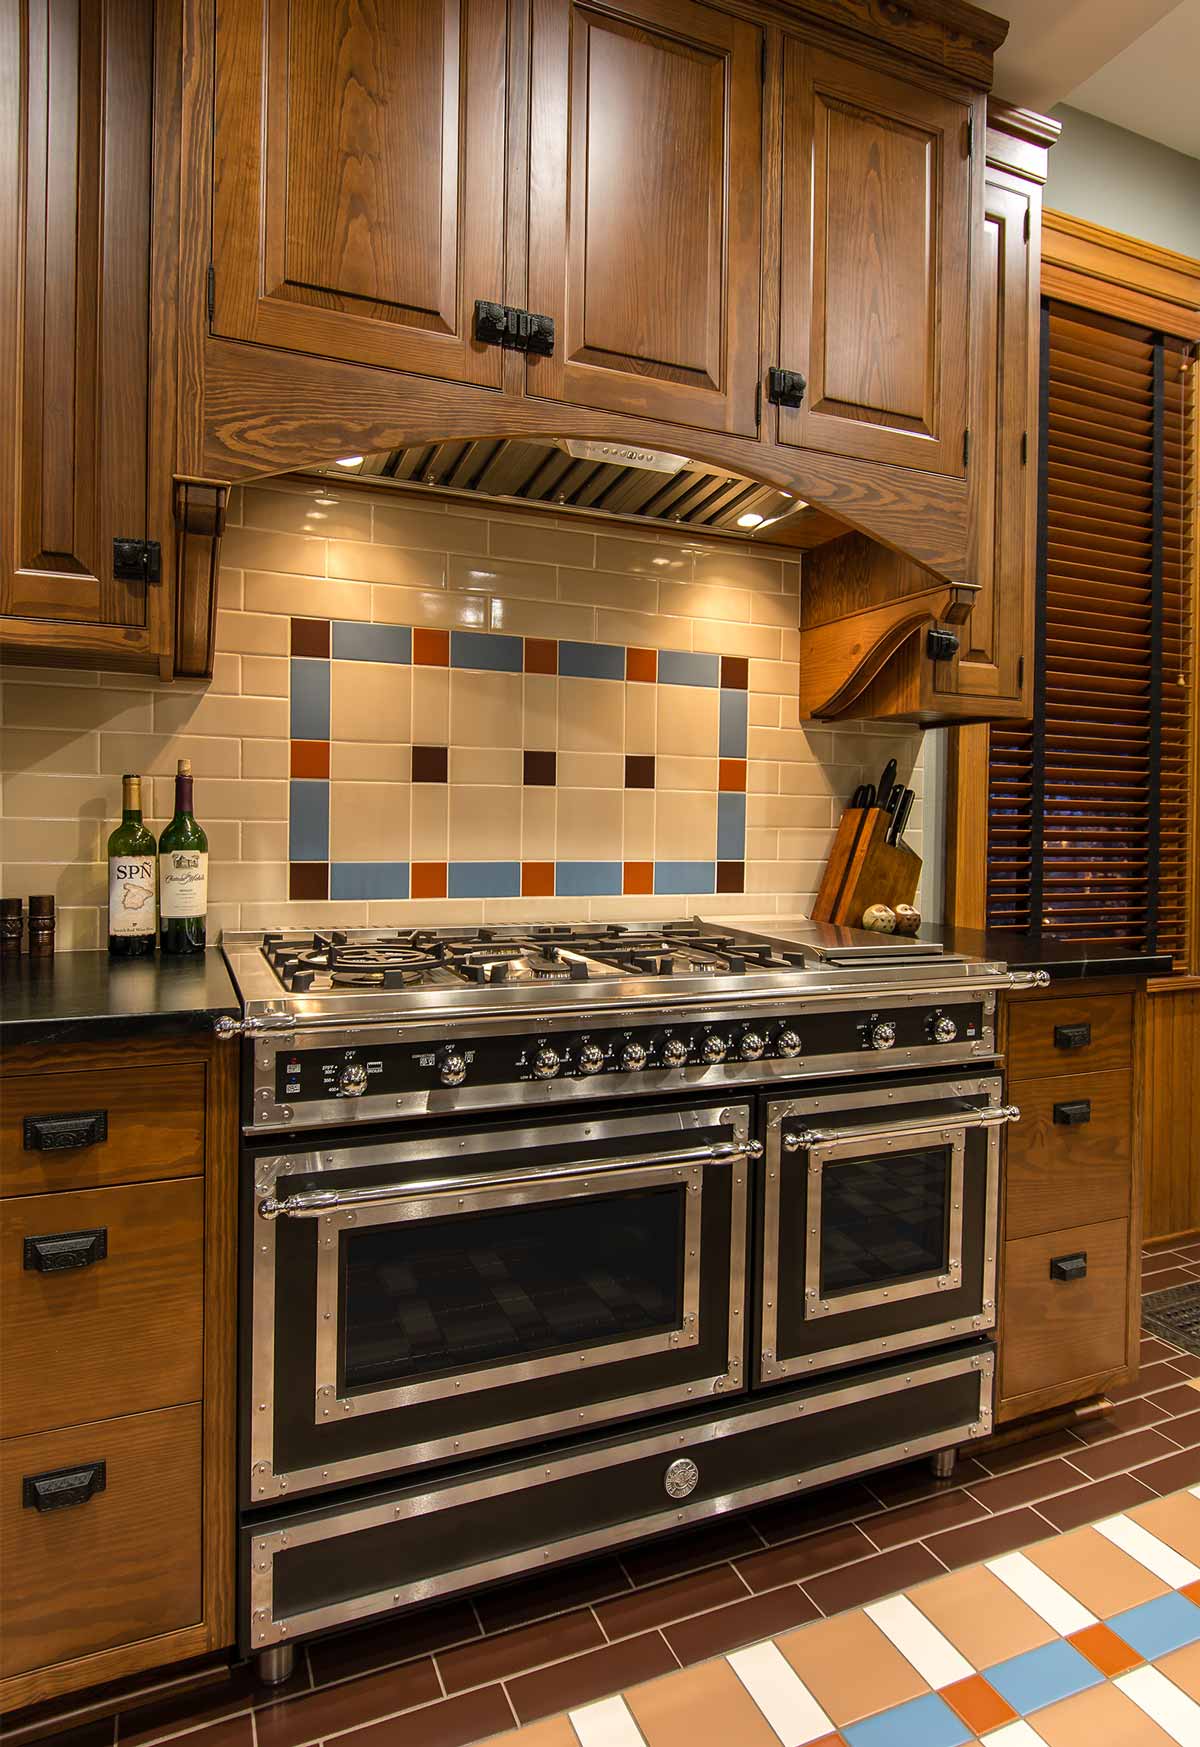 victorian looking modern stove range in a kitchen remodel by Silent Rivers in a historic Des Moines home with patterned tile backsplash and floor